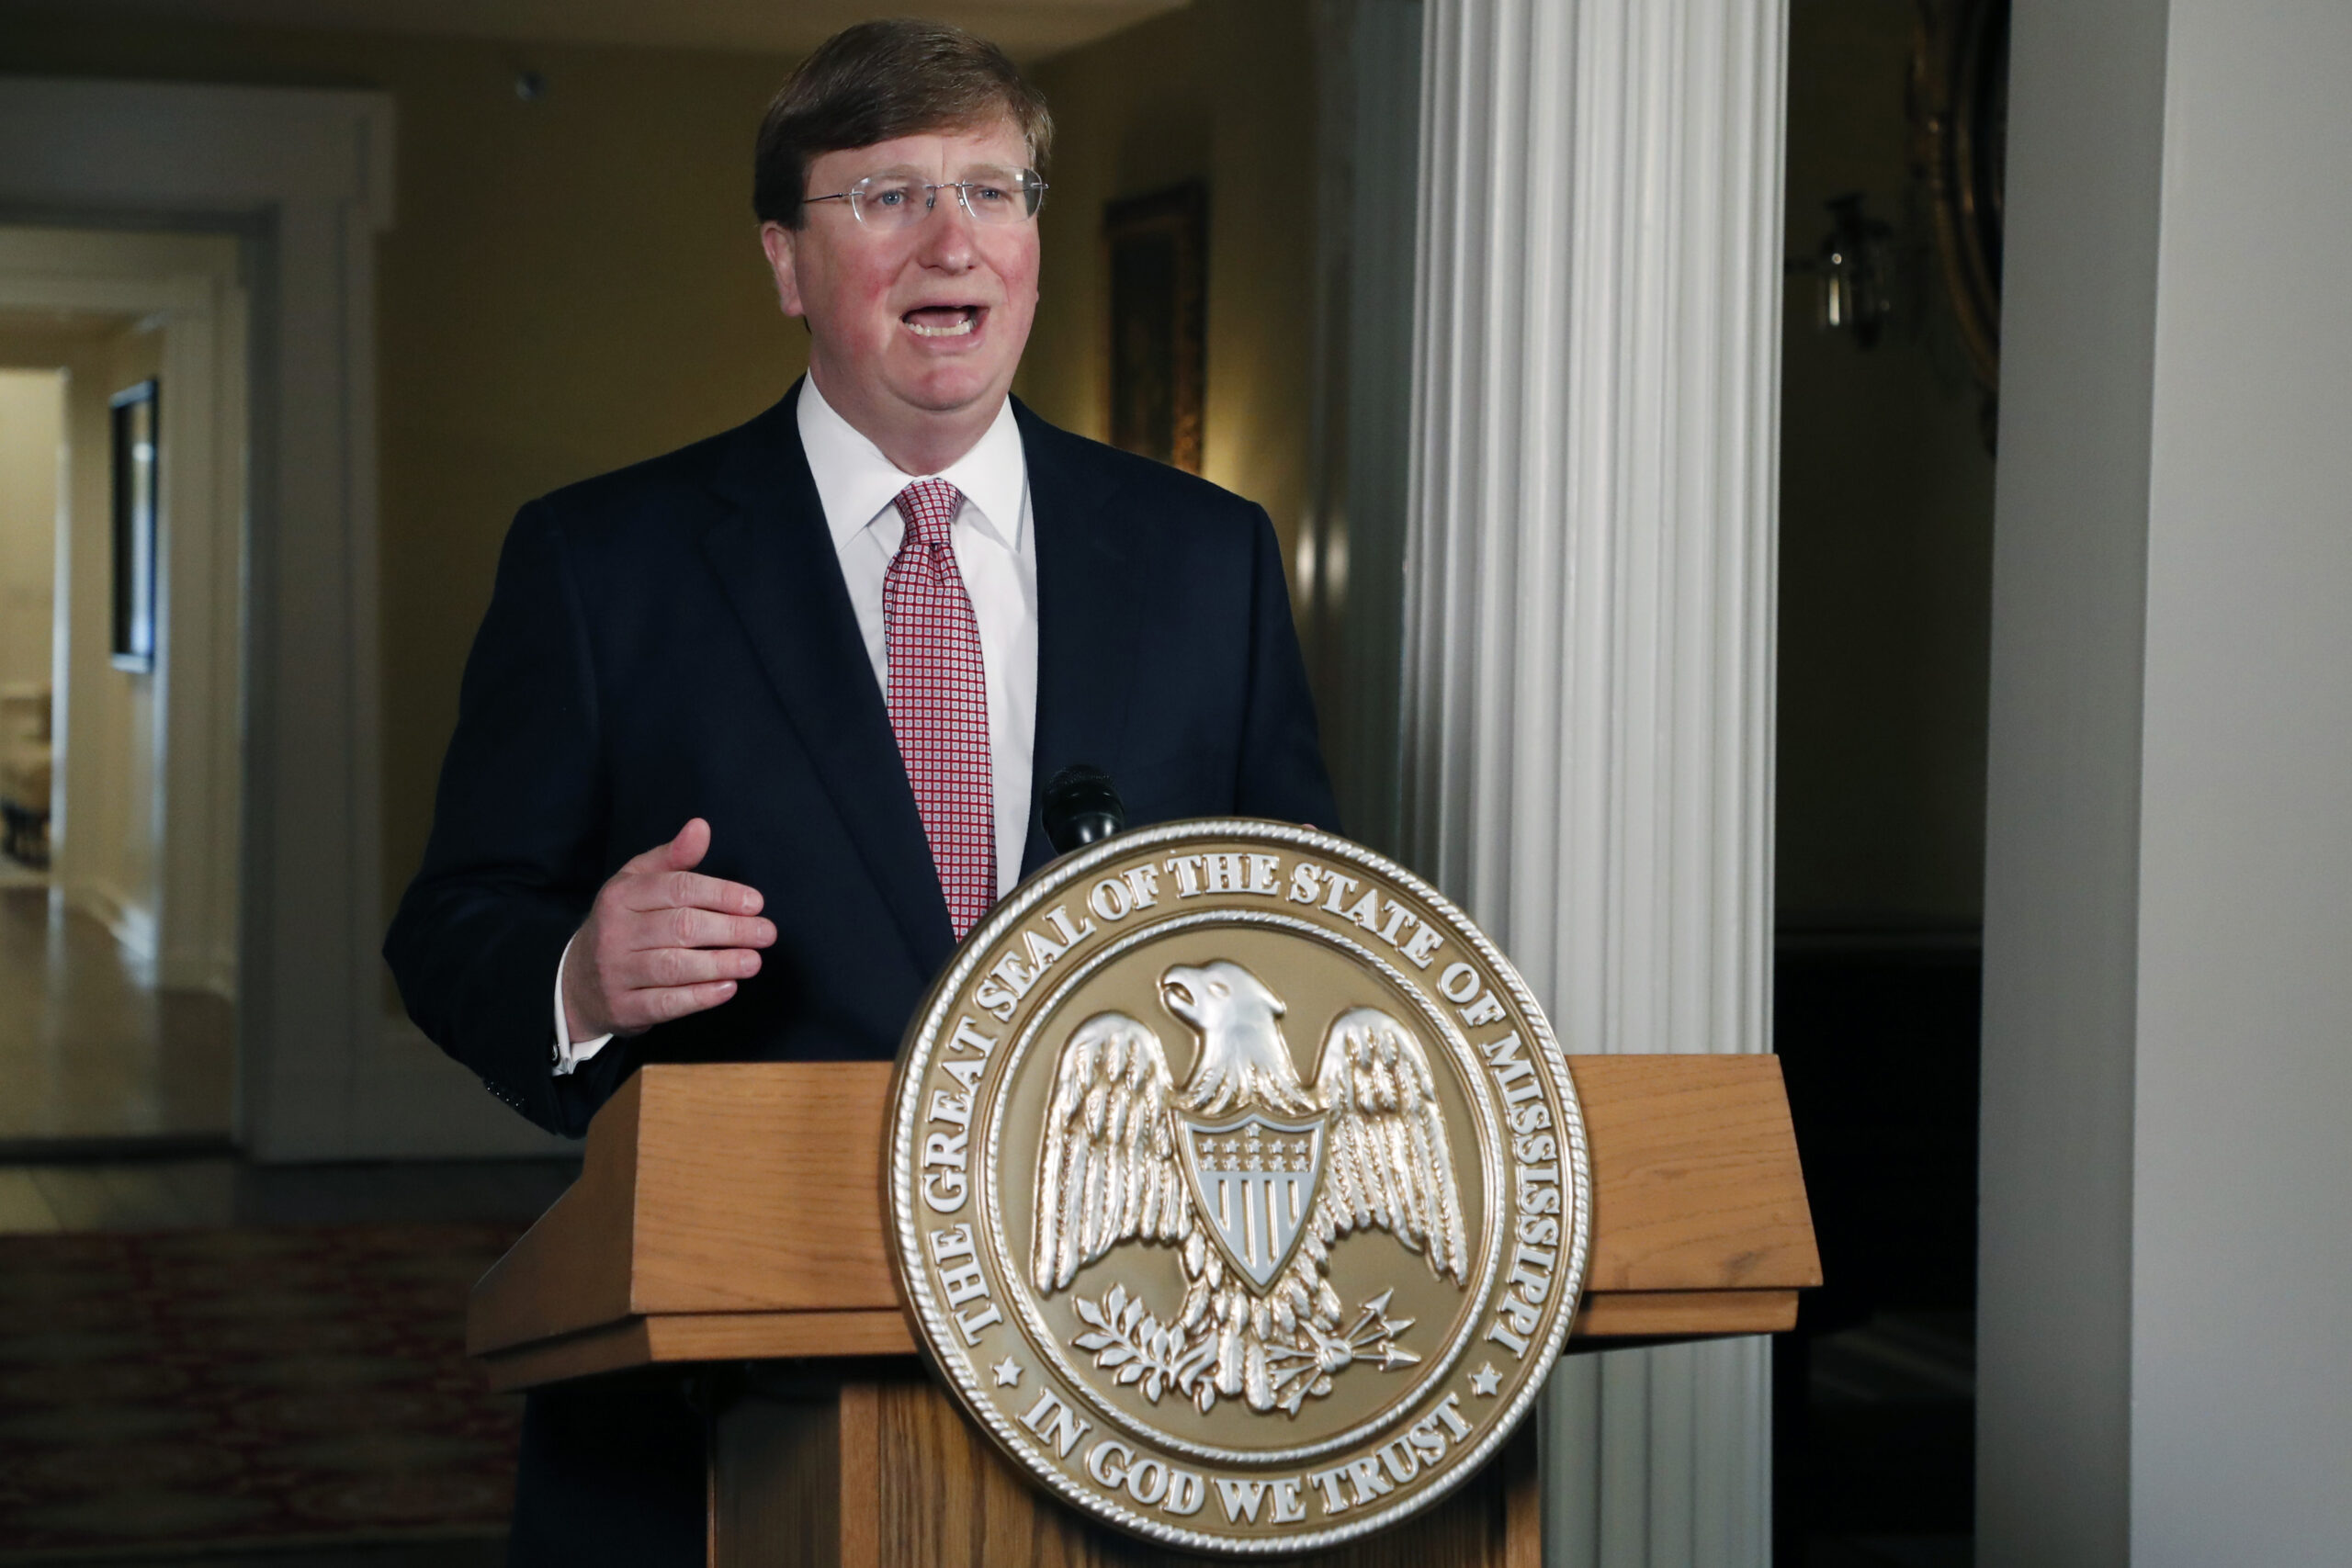 Tate Reeves delivering a speech